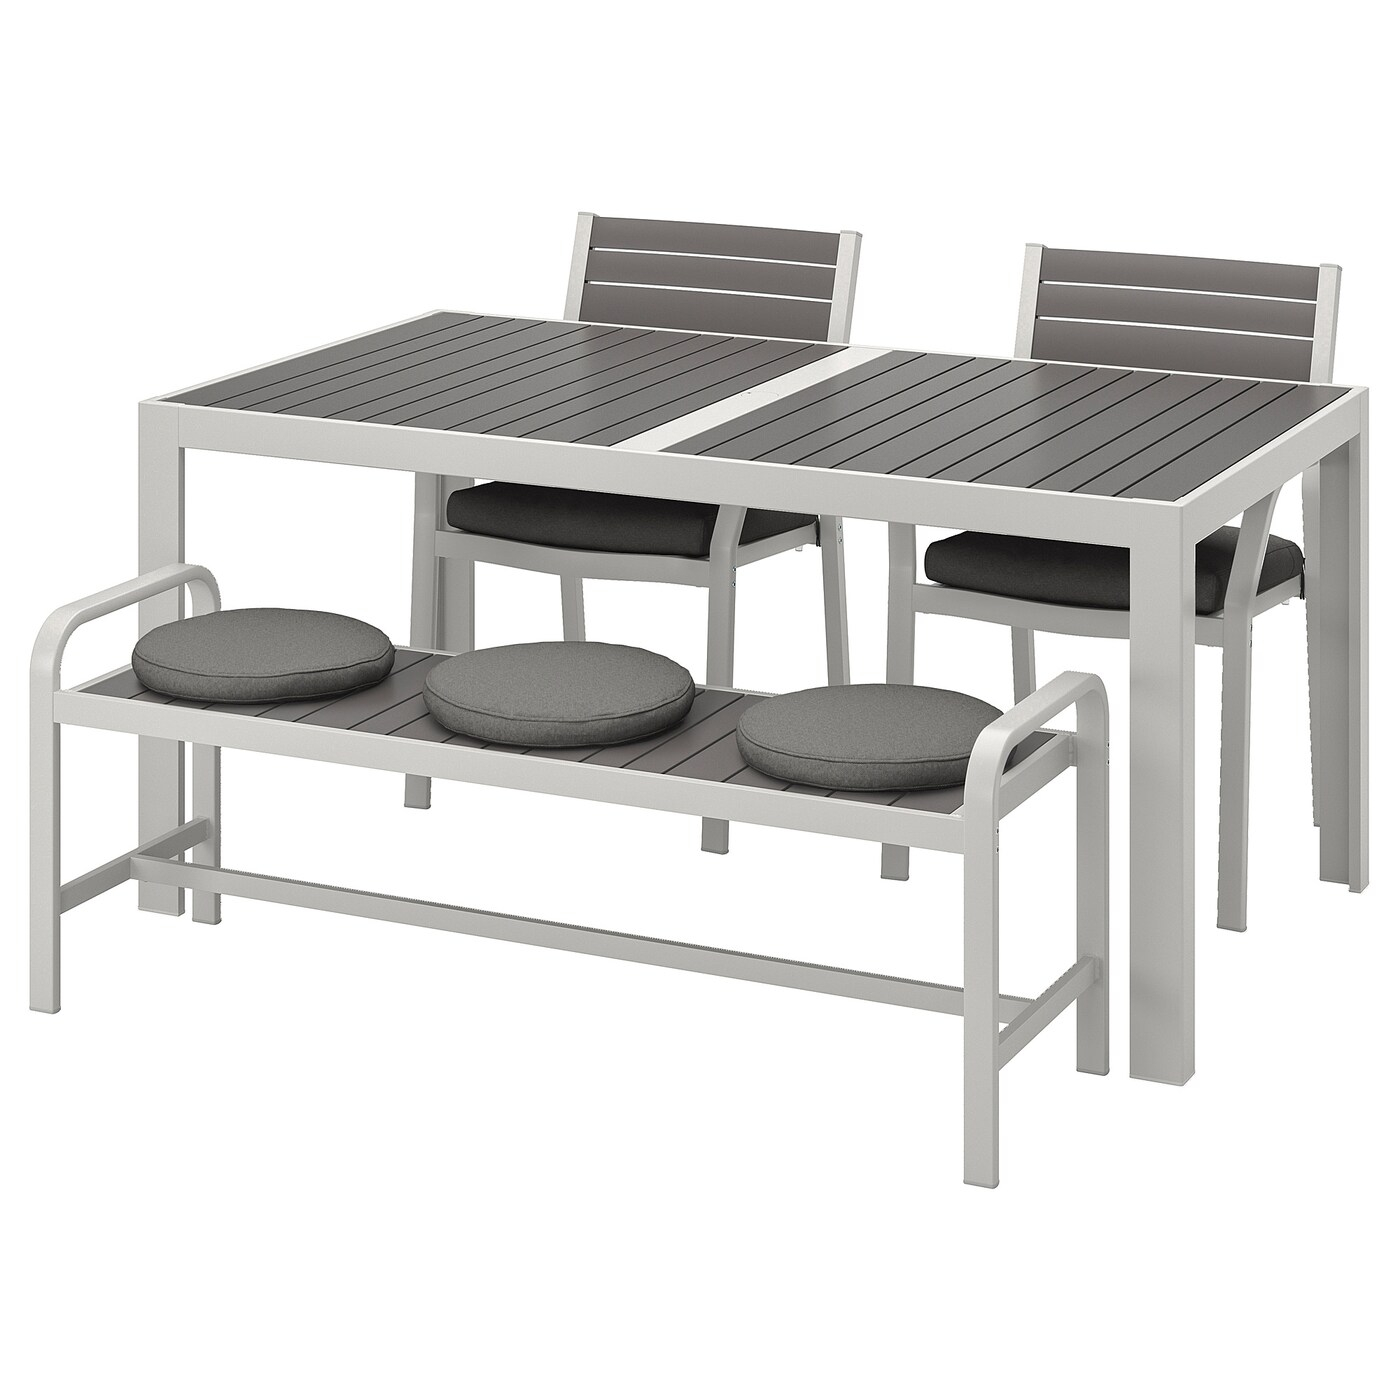 Sjlland Table 2 Chairs And Bench Outdoor Dark Gray Frsnduvholmen Dark Gray throughout dimensions 1400 X 1400